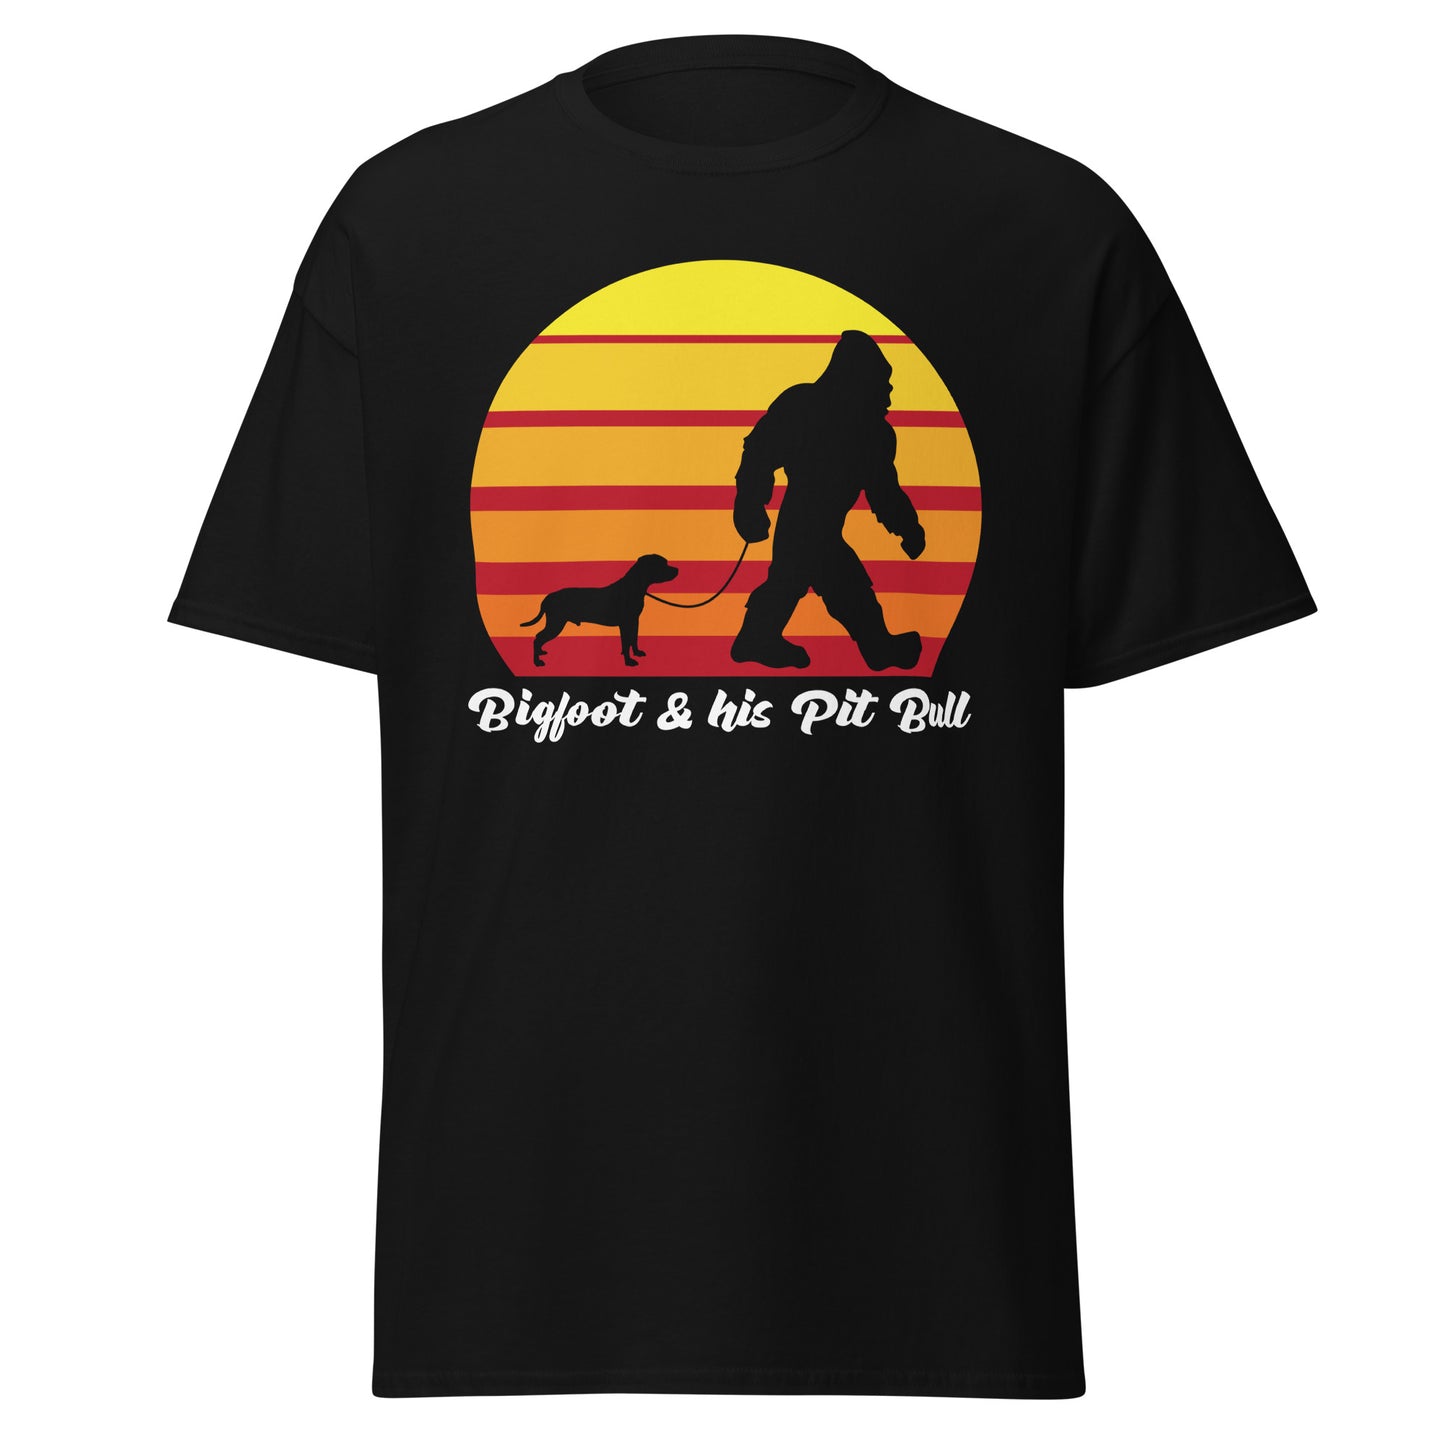 Bigfoot and his American Pit Bull men’s black t-shirt by Dog Artistry.